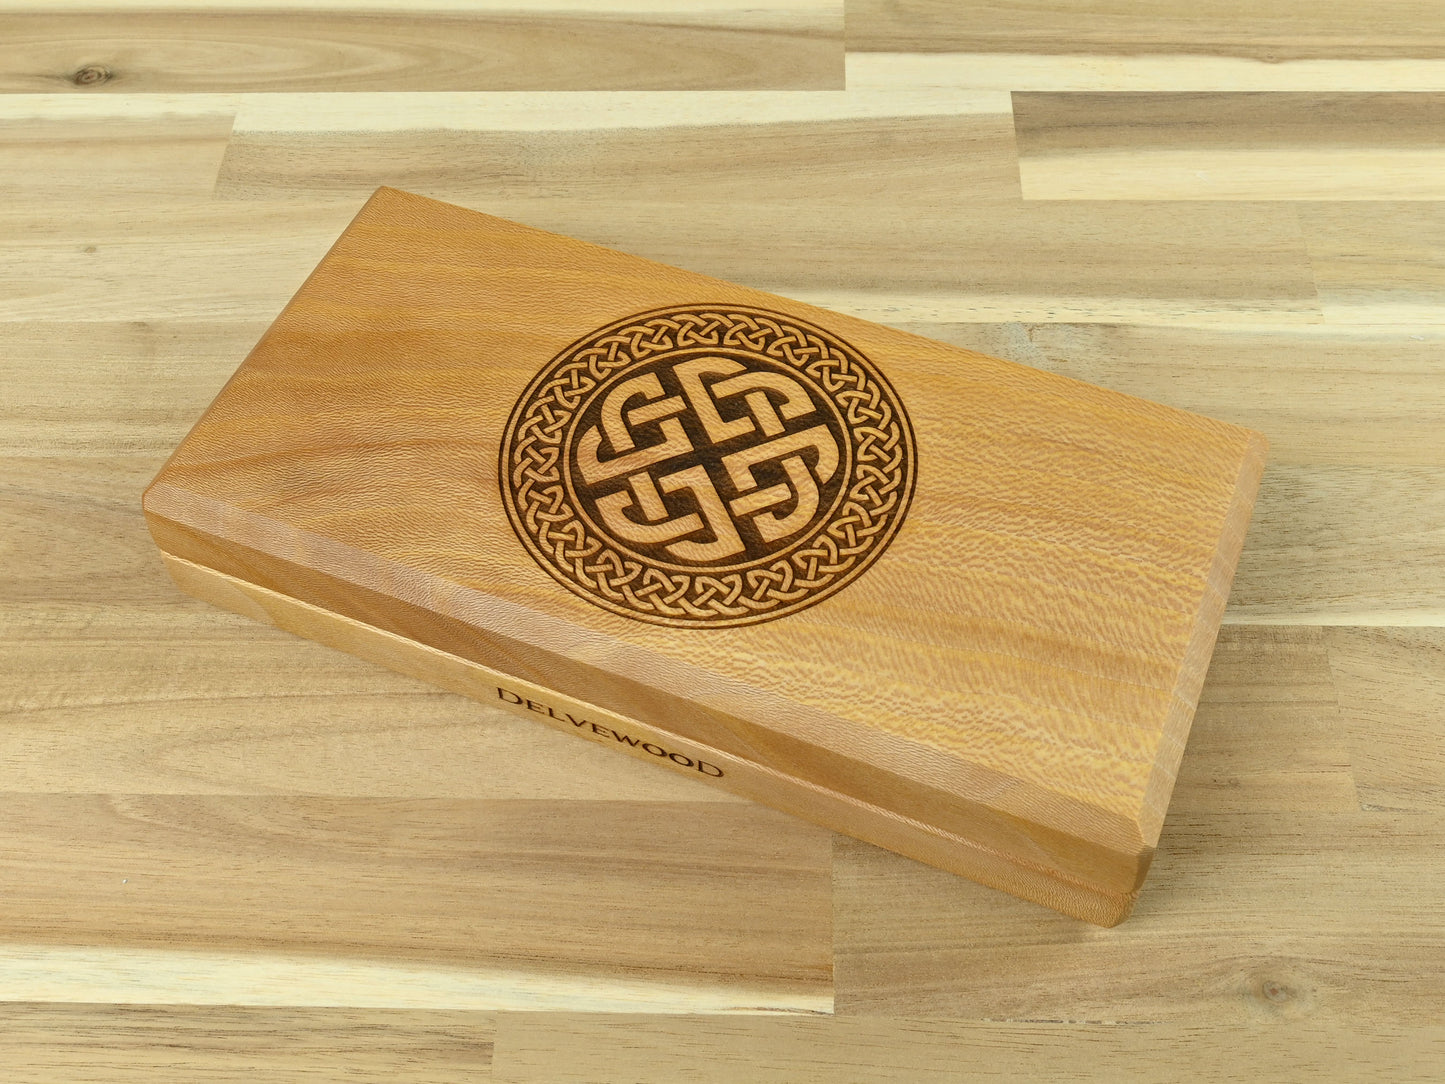 Sycamore Delver's kit dice box and tray with celtic knot engraving for dnd rpg